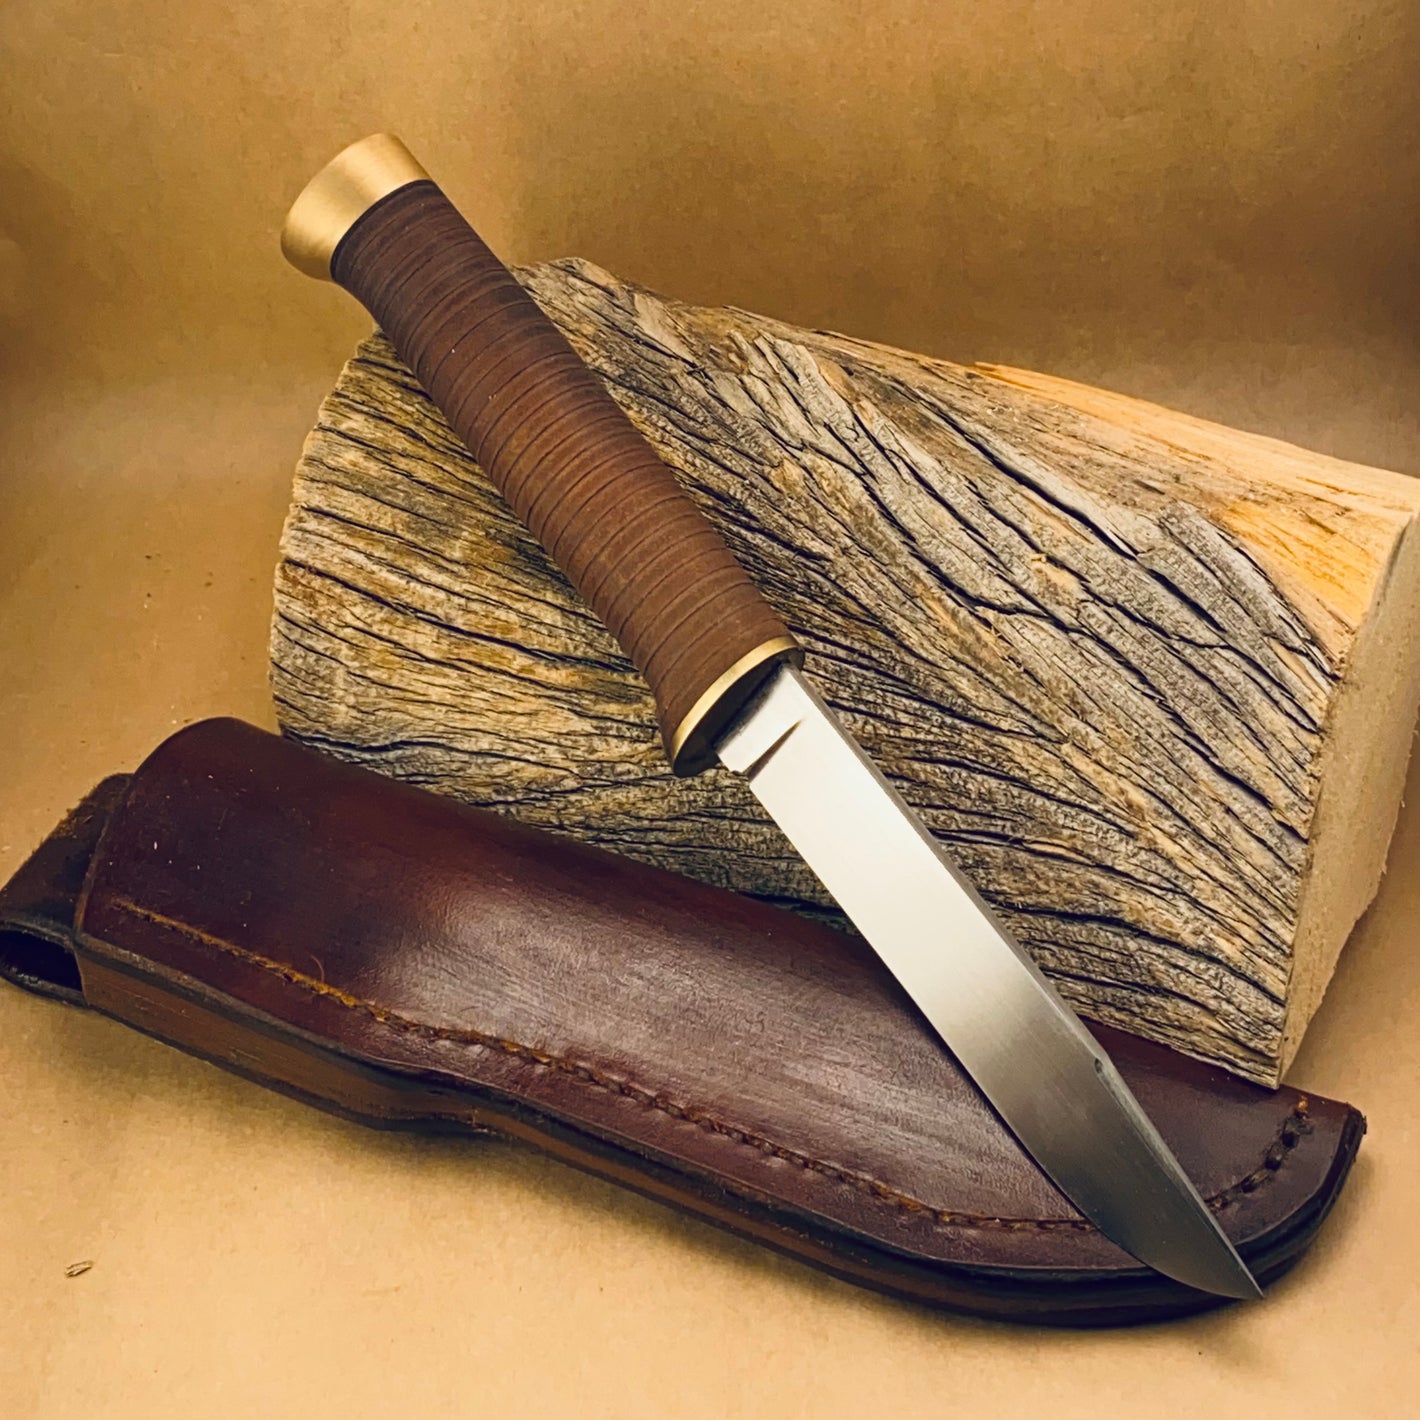 Classic styled (think your grandpas hunting knife)skinny hunting/fishing knife with a false edge at the tip. It has a thing brass plate guard, stacked brown leather handle, & a half inch thick swelled brass pommel. It is leaned up against a weathered piece of firewood with a dark brown leather belt sheath laying underneath it.